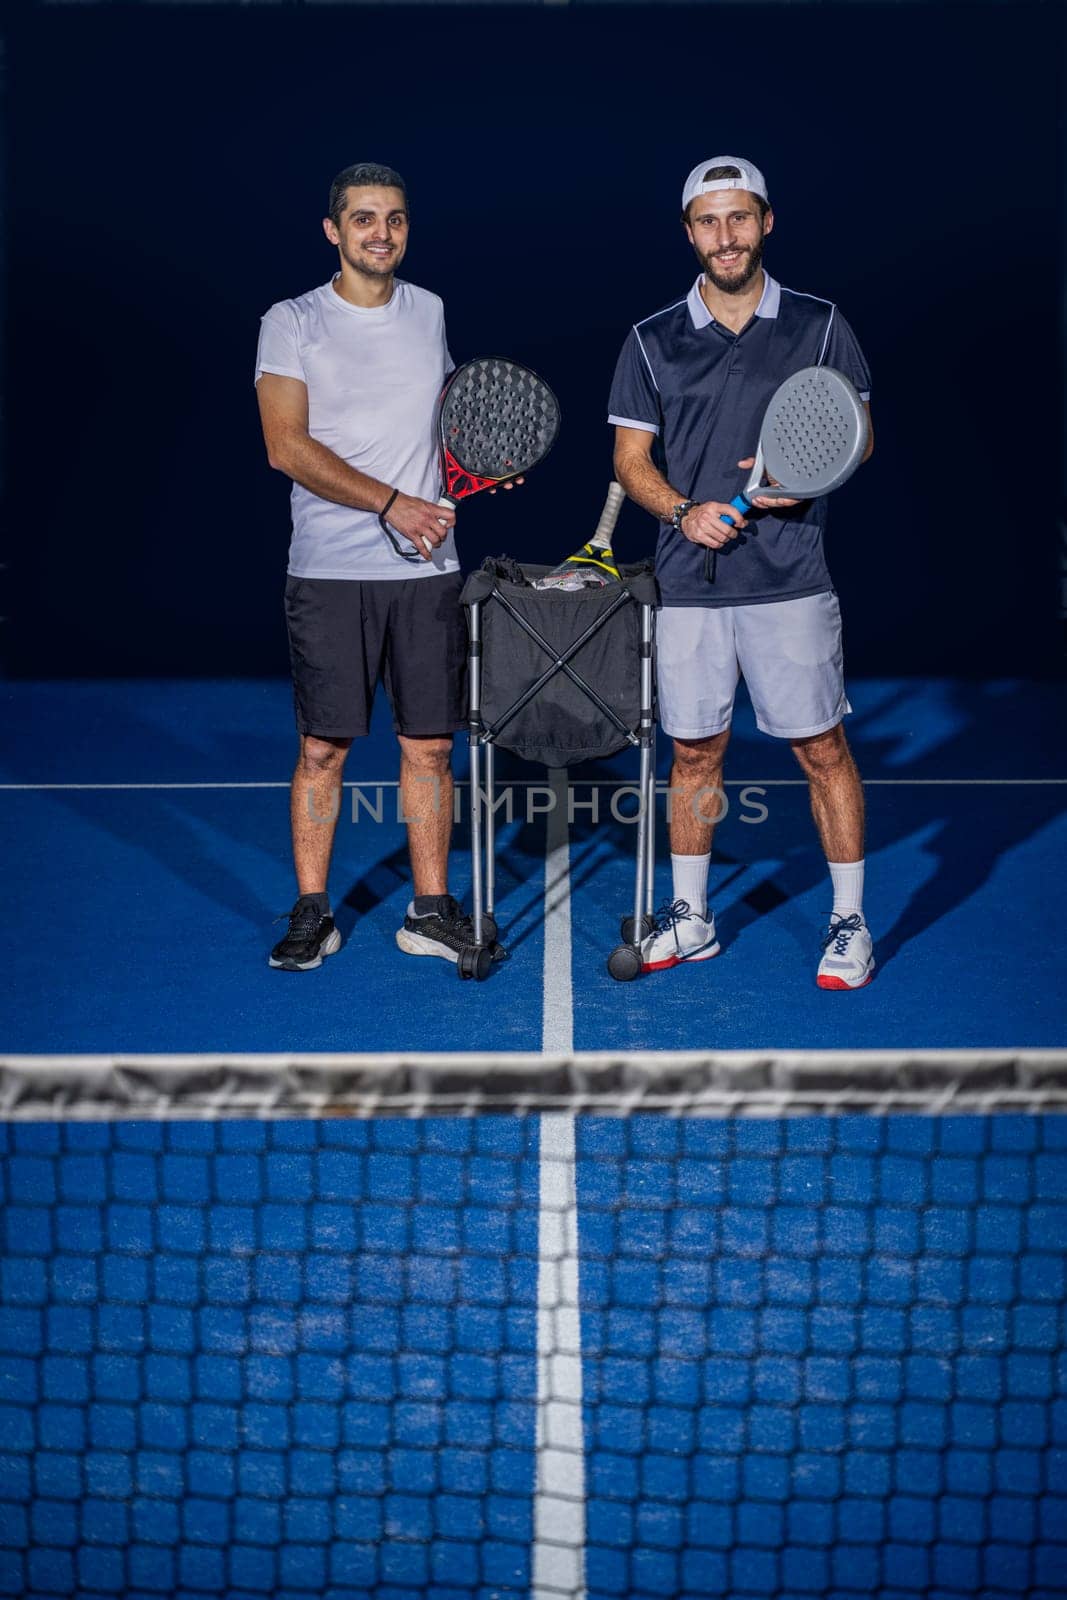 Full length portrait of two sporty young men in sportswear standing on indoor court with paddle rackets in hands after match.